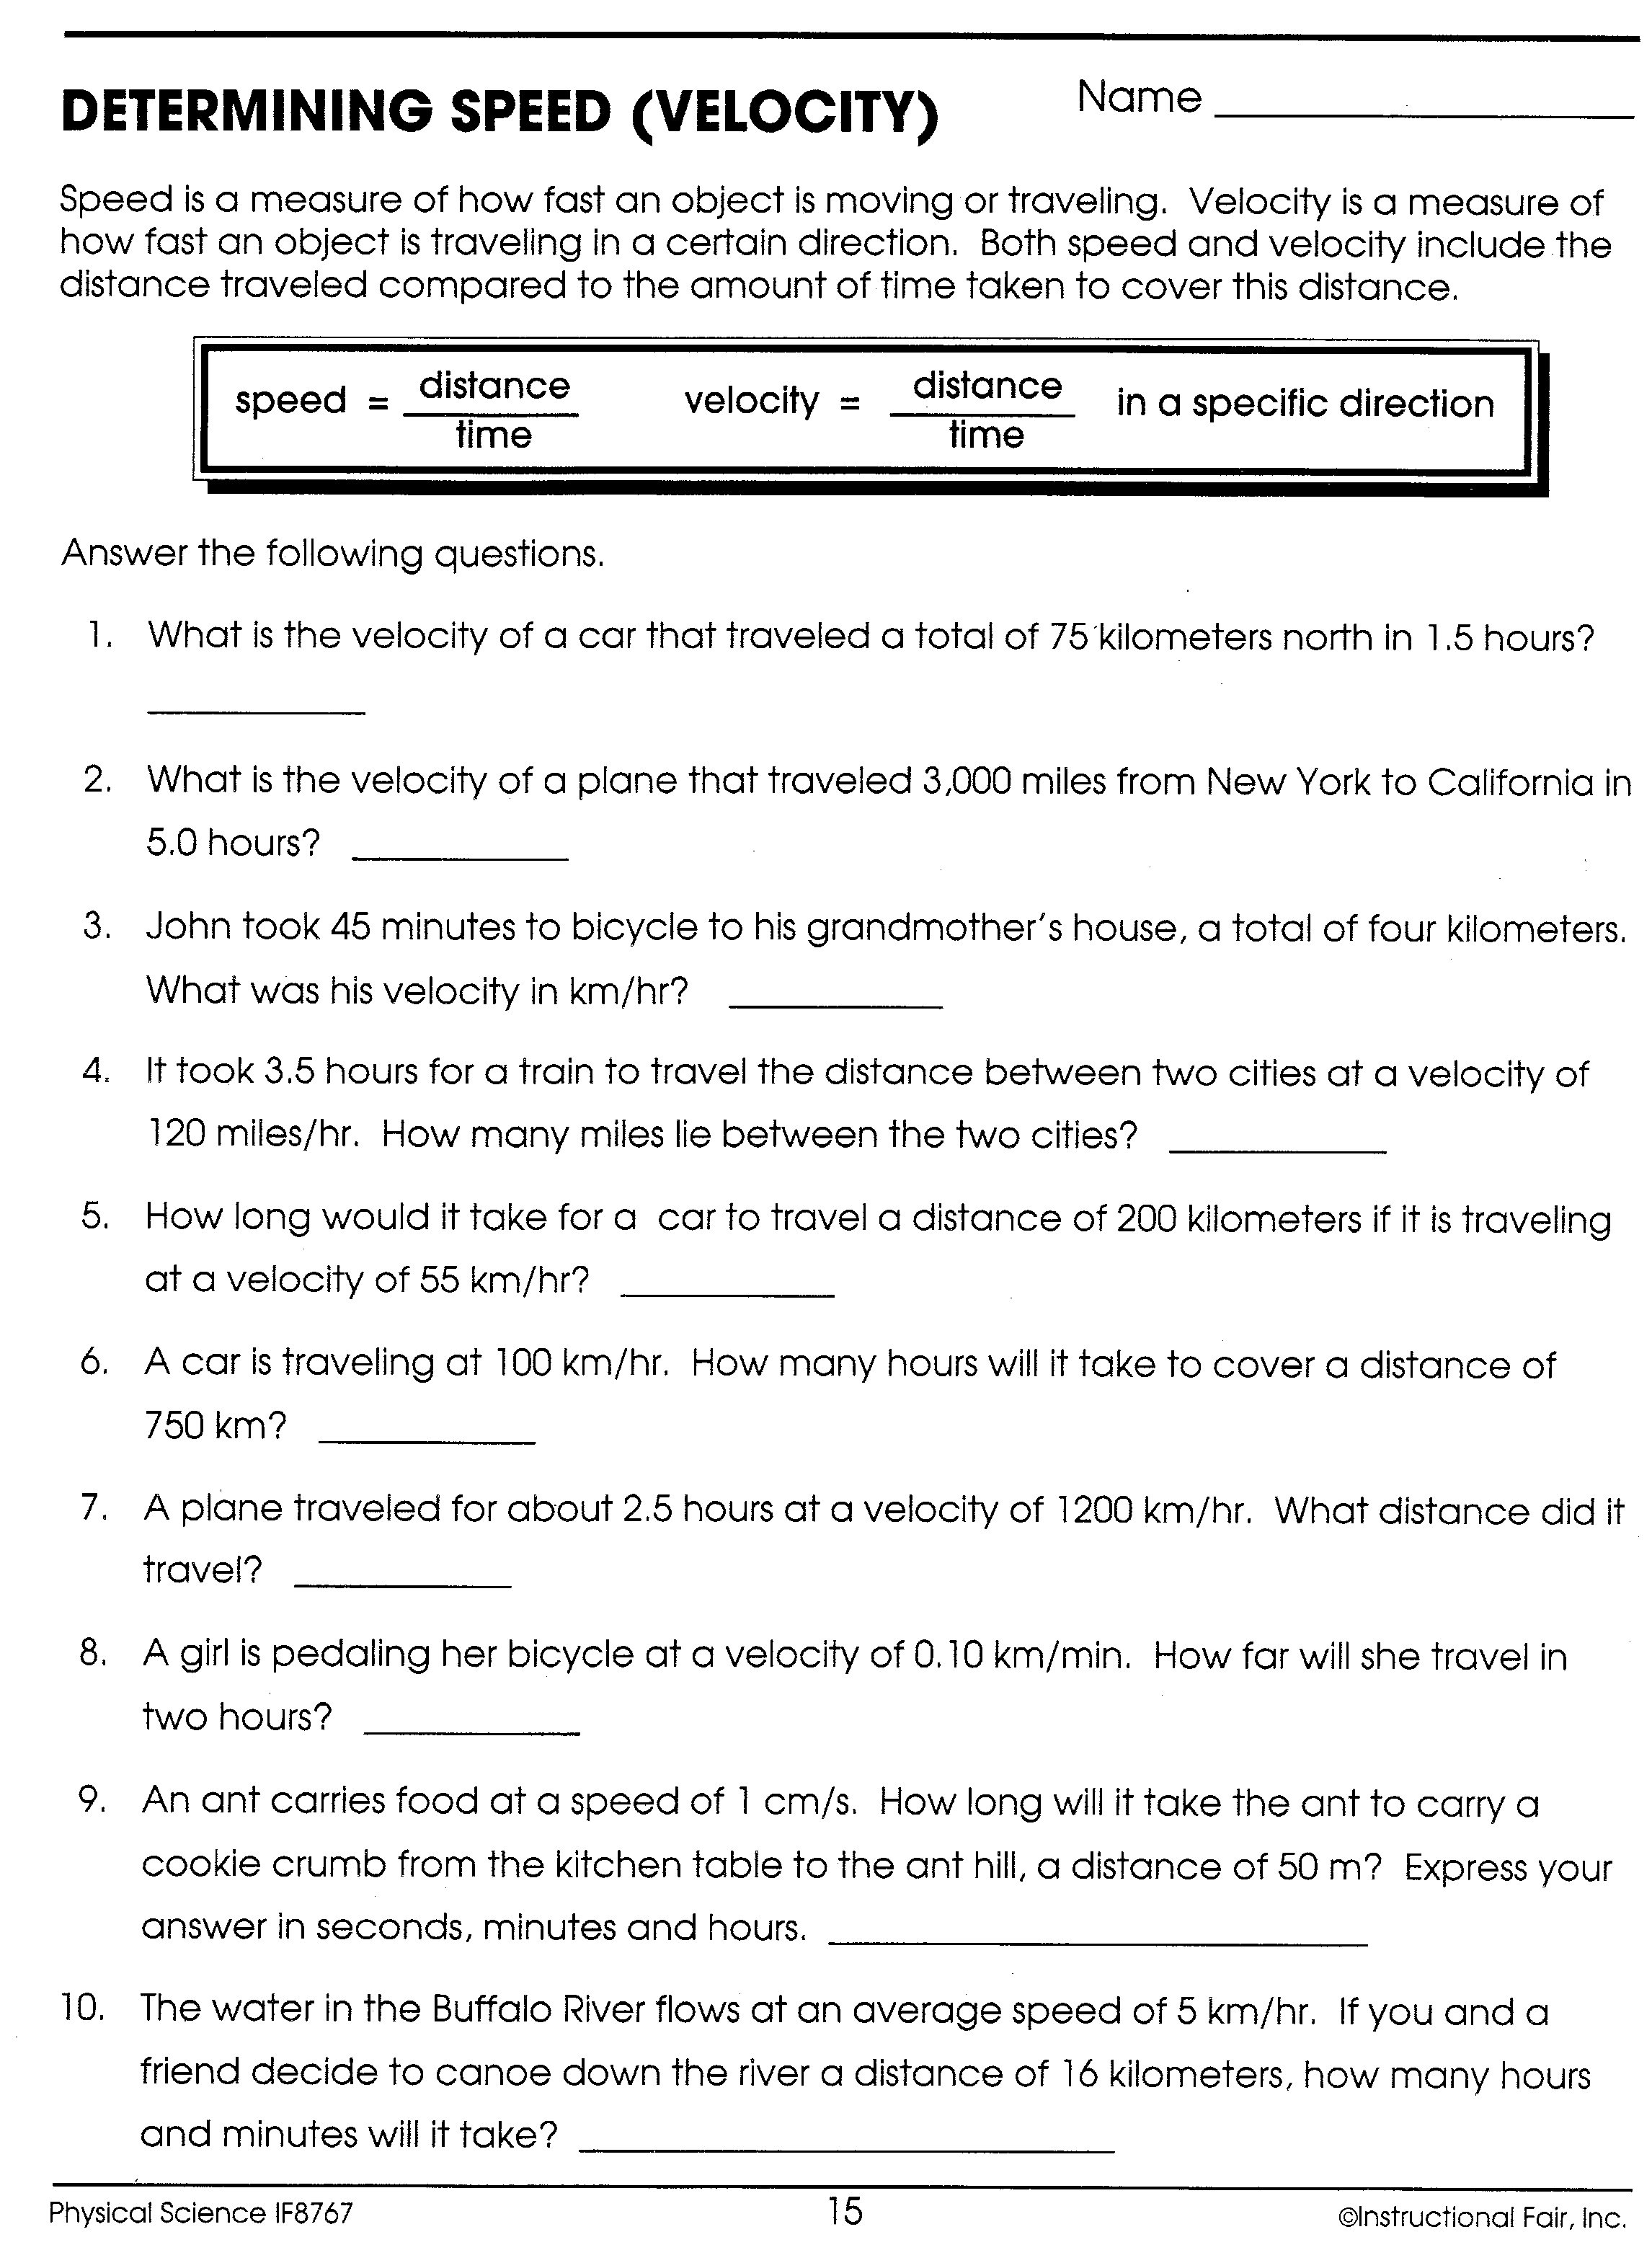 Speed & Velocity - Lessons - Blendspace Throughout Velocity Worksheet With Answers